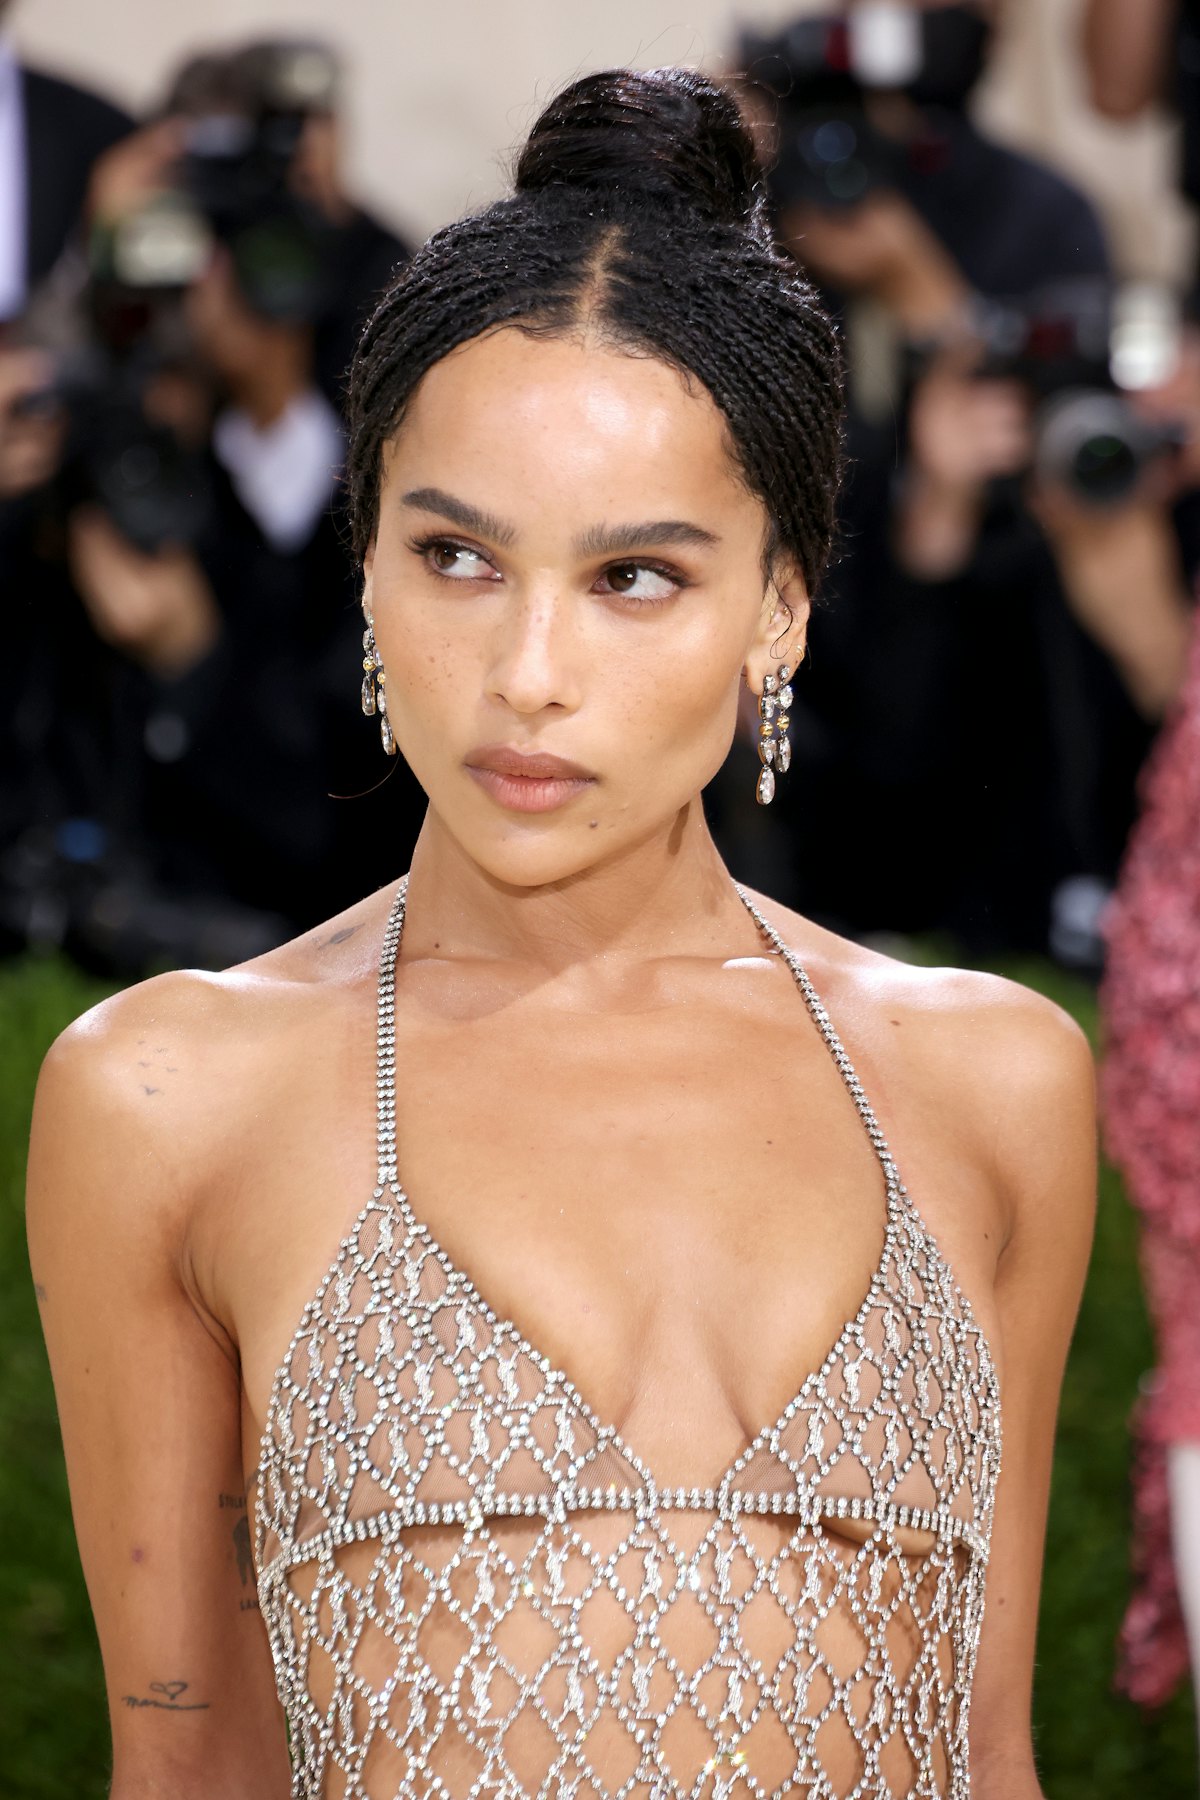 Naked dresses are back according to the Met Gala red carpet. Everyone from Kendall Jenner to Zoë Kra...